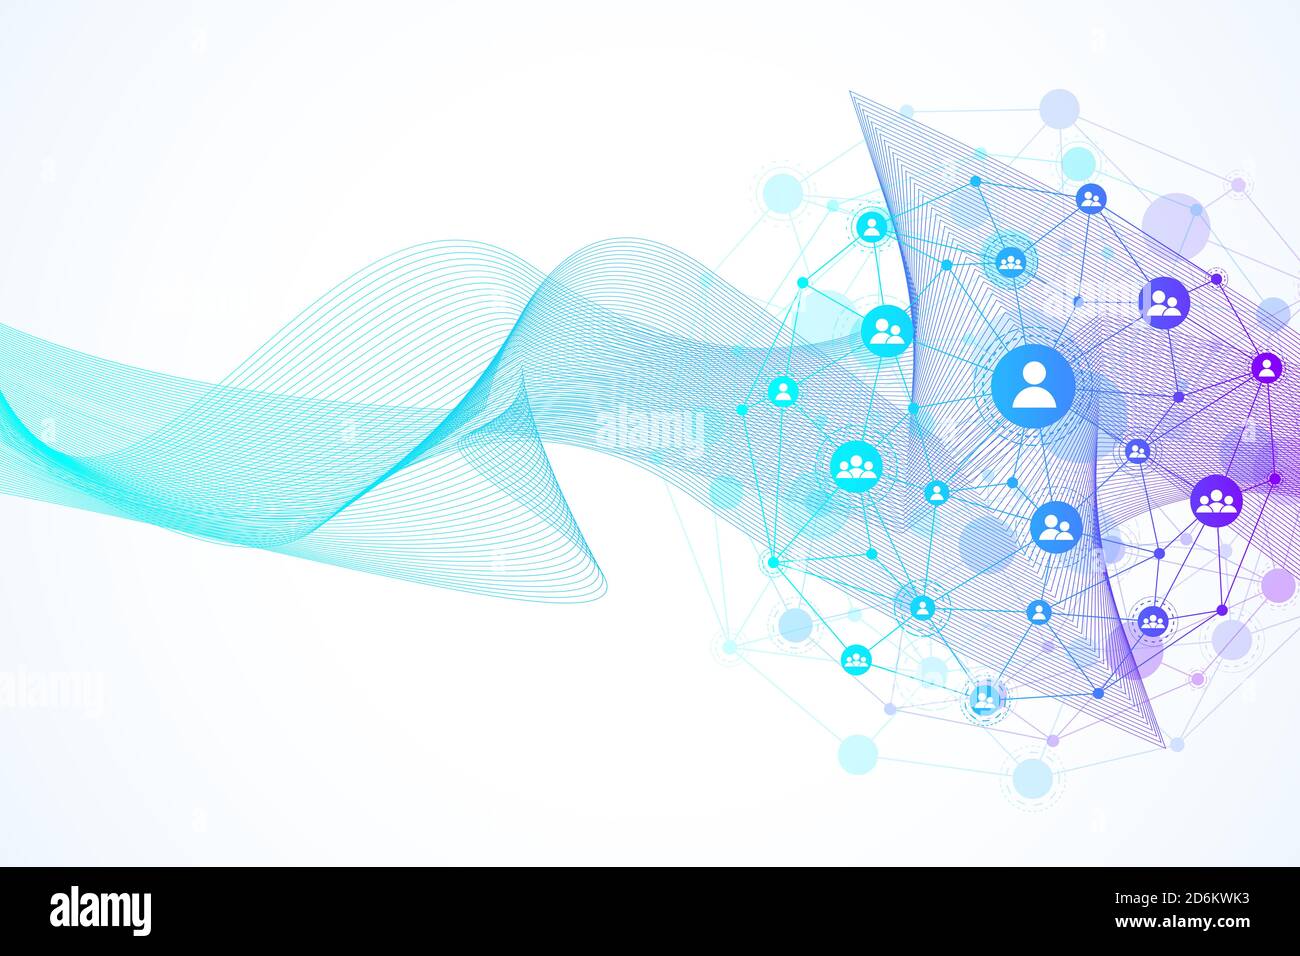 Internet connection background, abstract sense of science and technology graphic design. Global network connection illustration Stock Photo